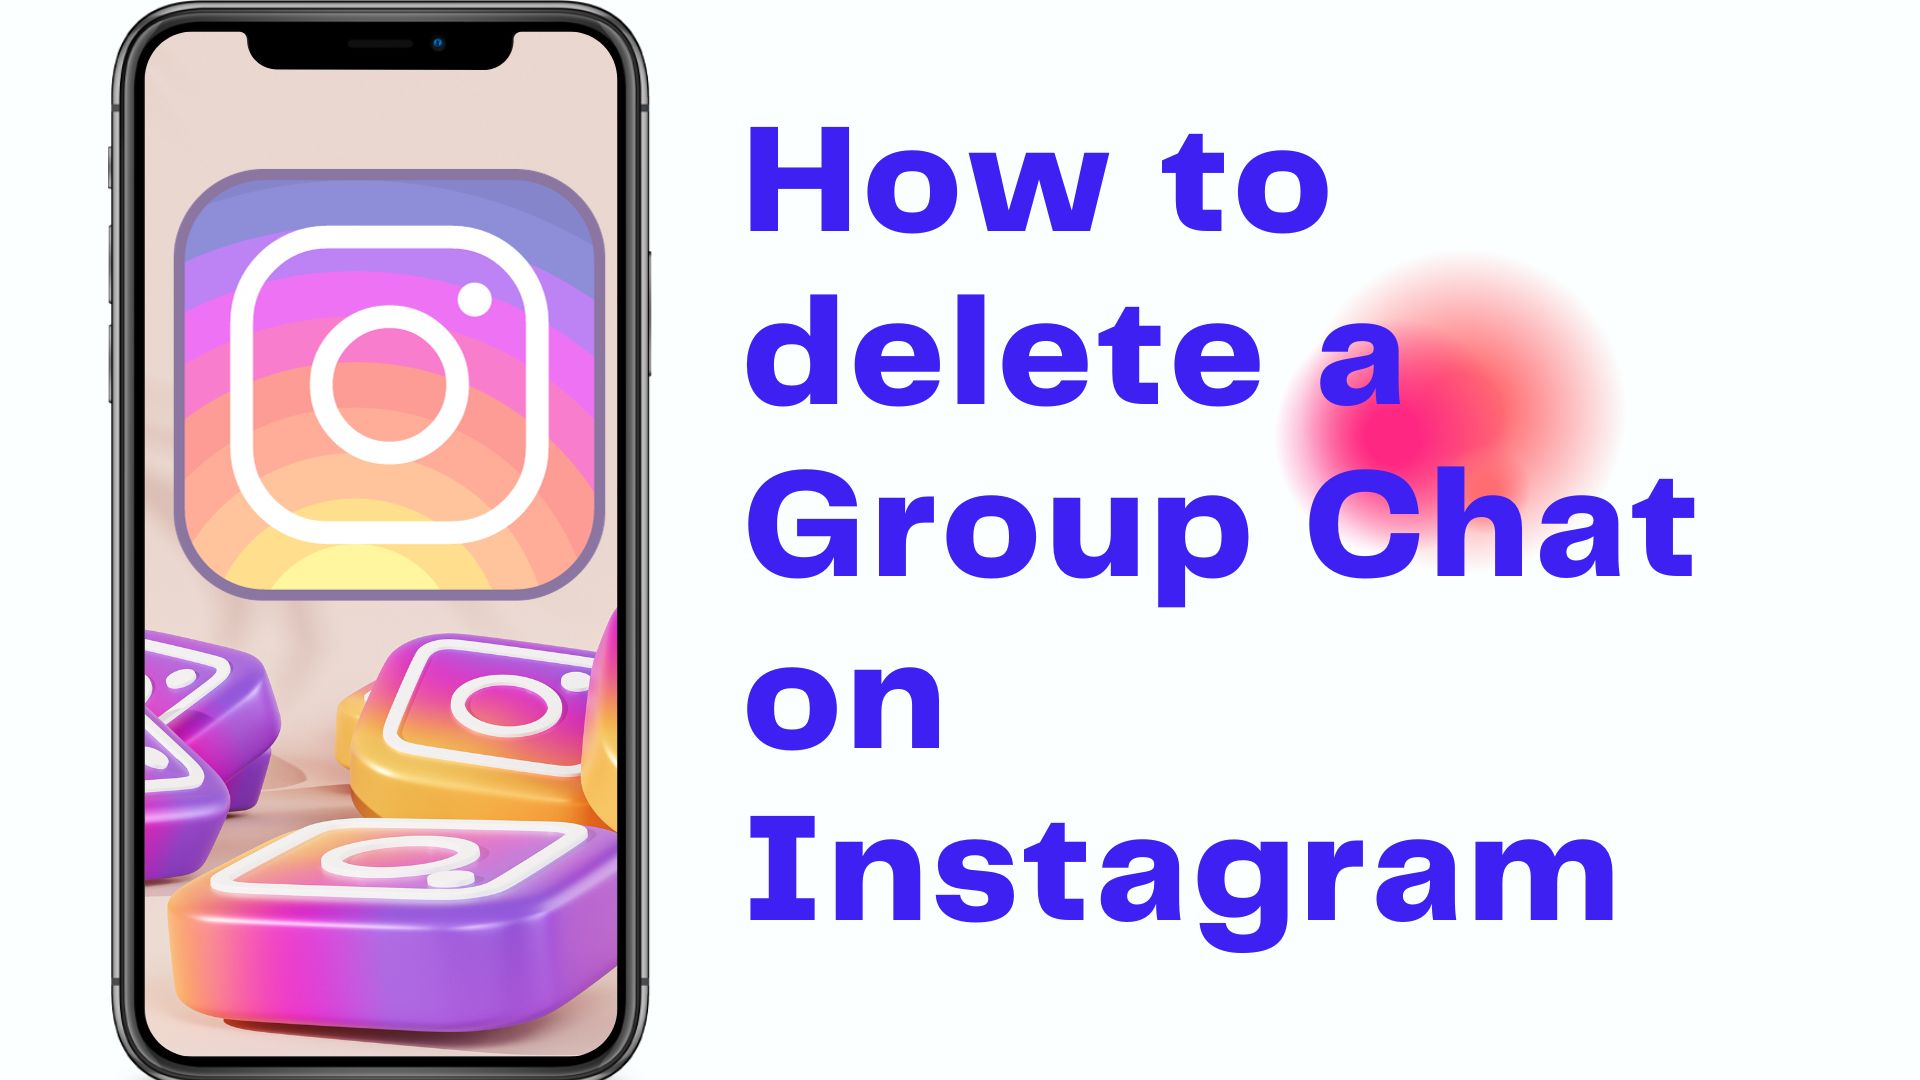 delete a Group Chat on Instagram